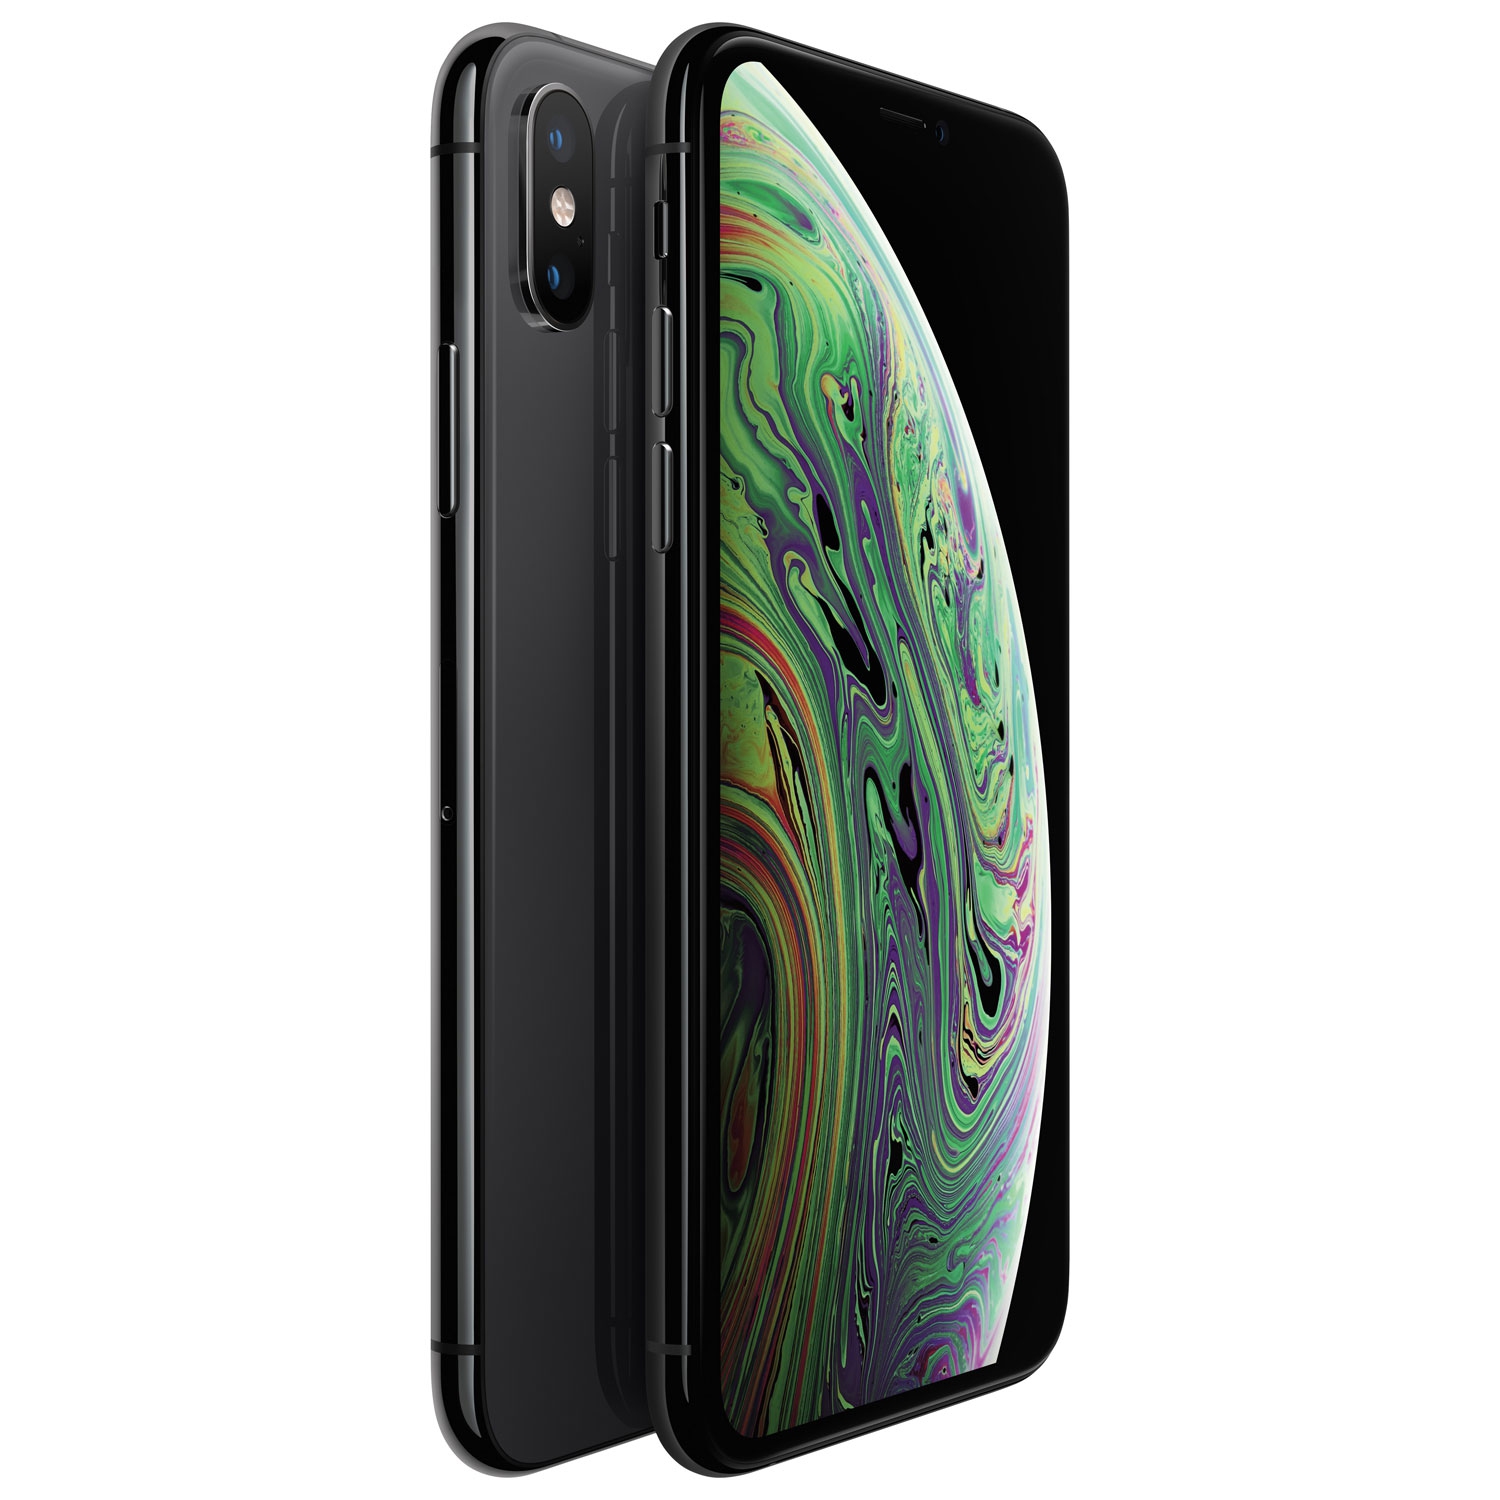 Refurbished (Excellent) - Apple iPhone XS Max 256GB Smartphone - Space Grey - Unlocked - Certified Refurbished